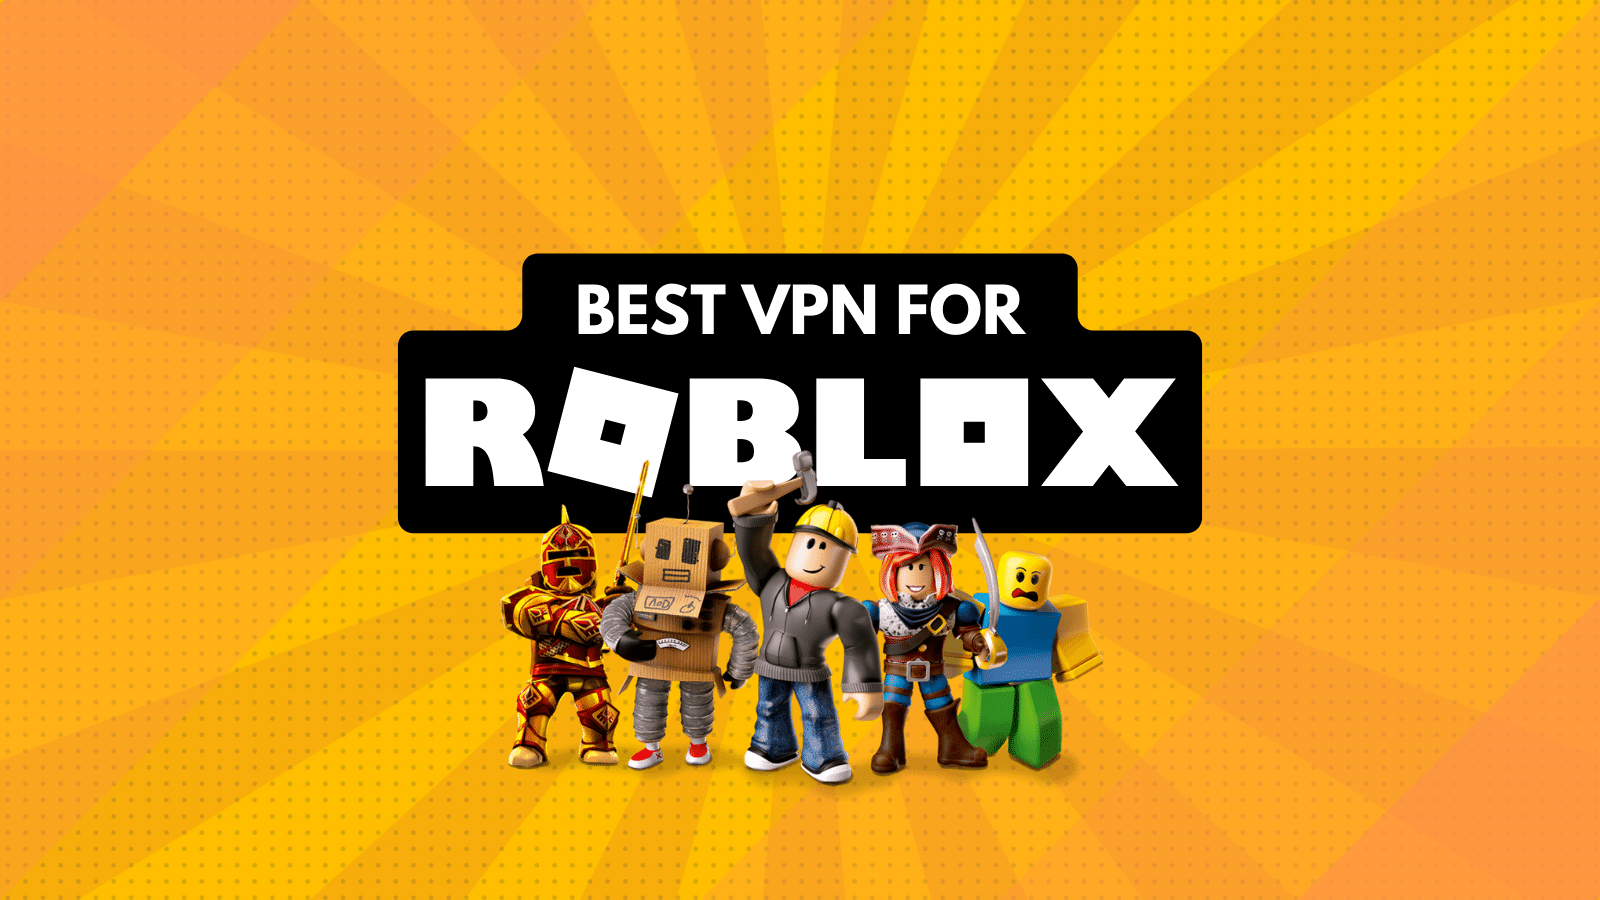 Roblox VPN - The Best Free VPN for Roblox